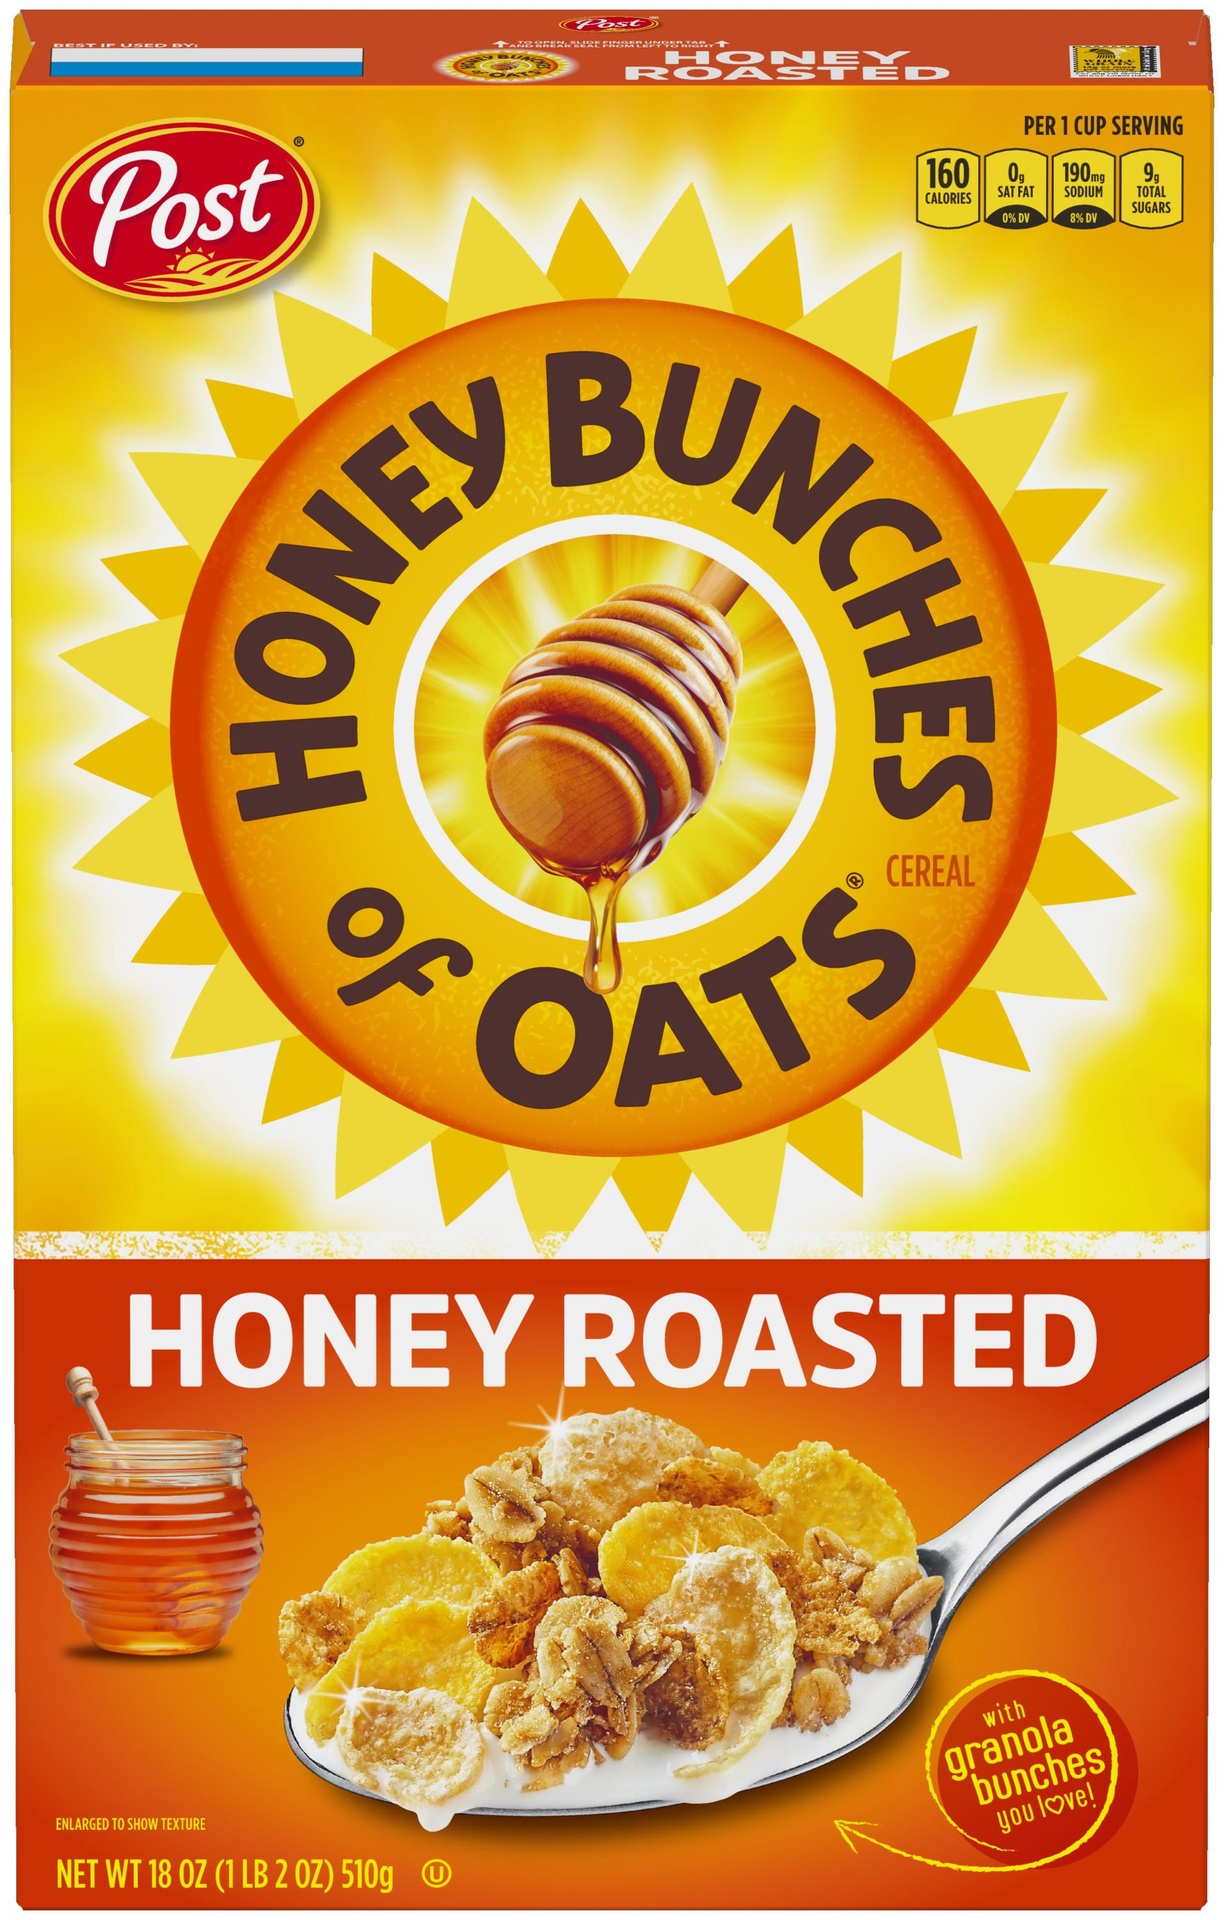 POST HONEY ROASTED CEREAL